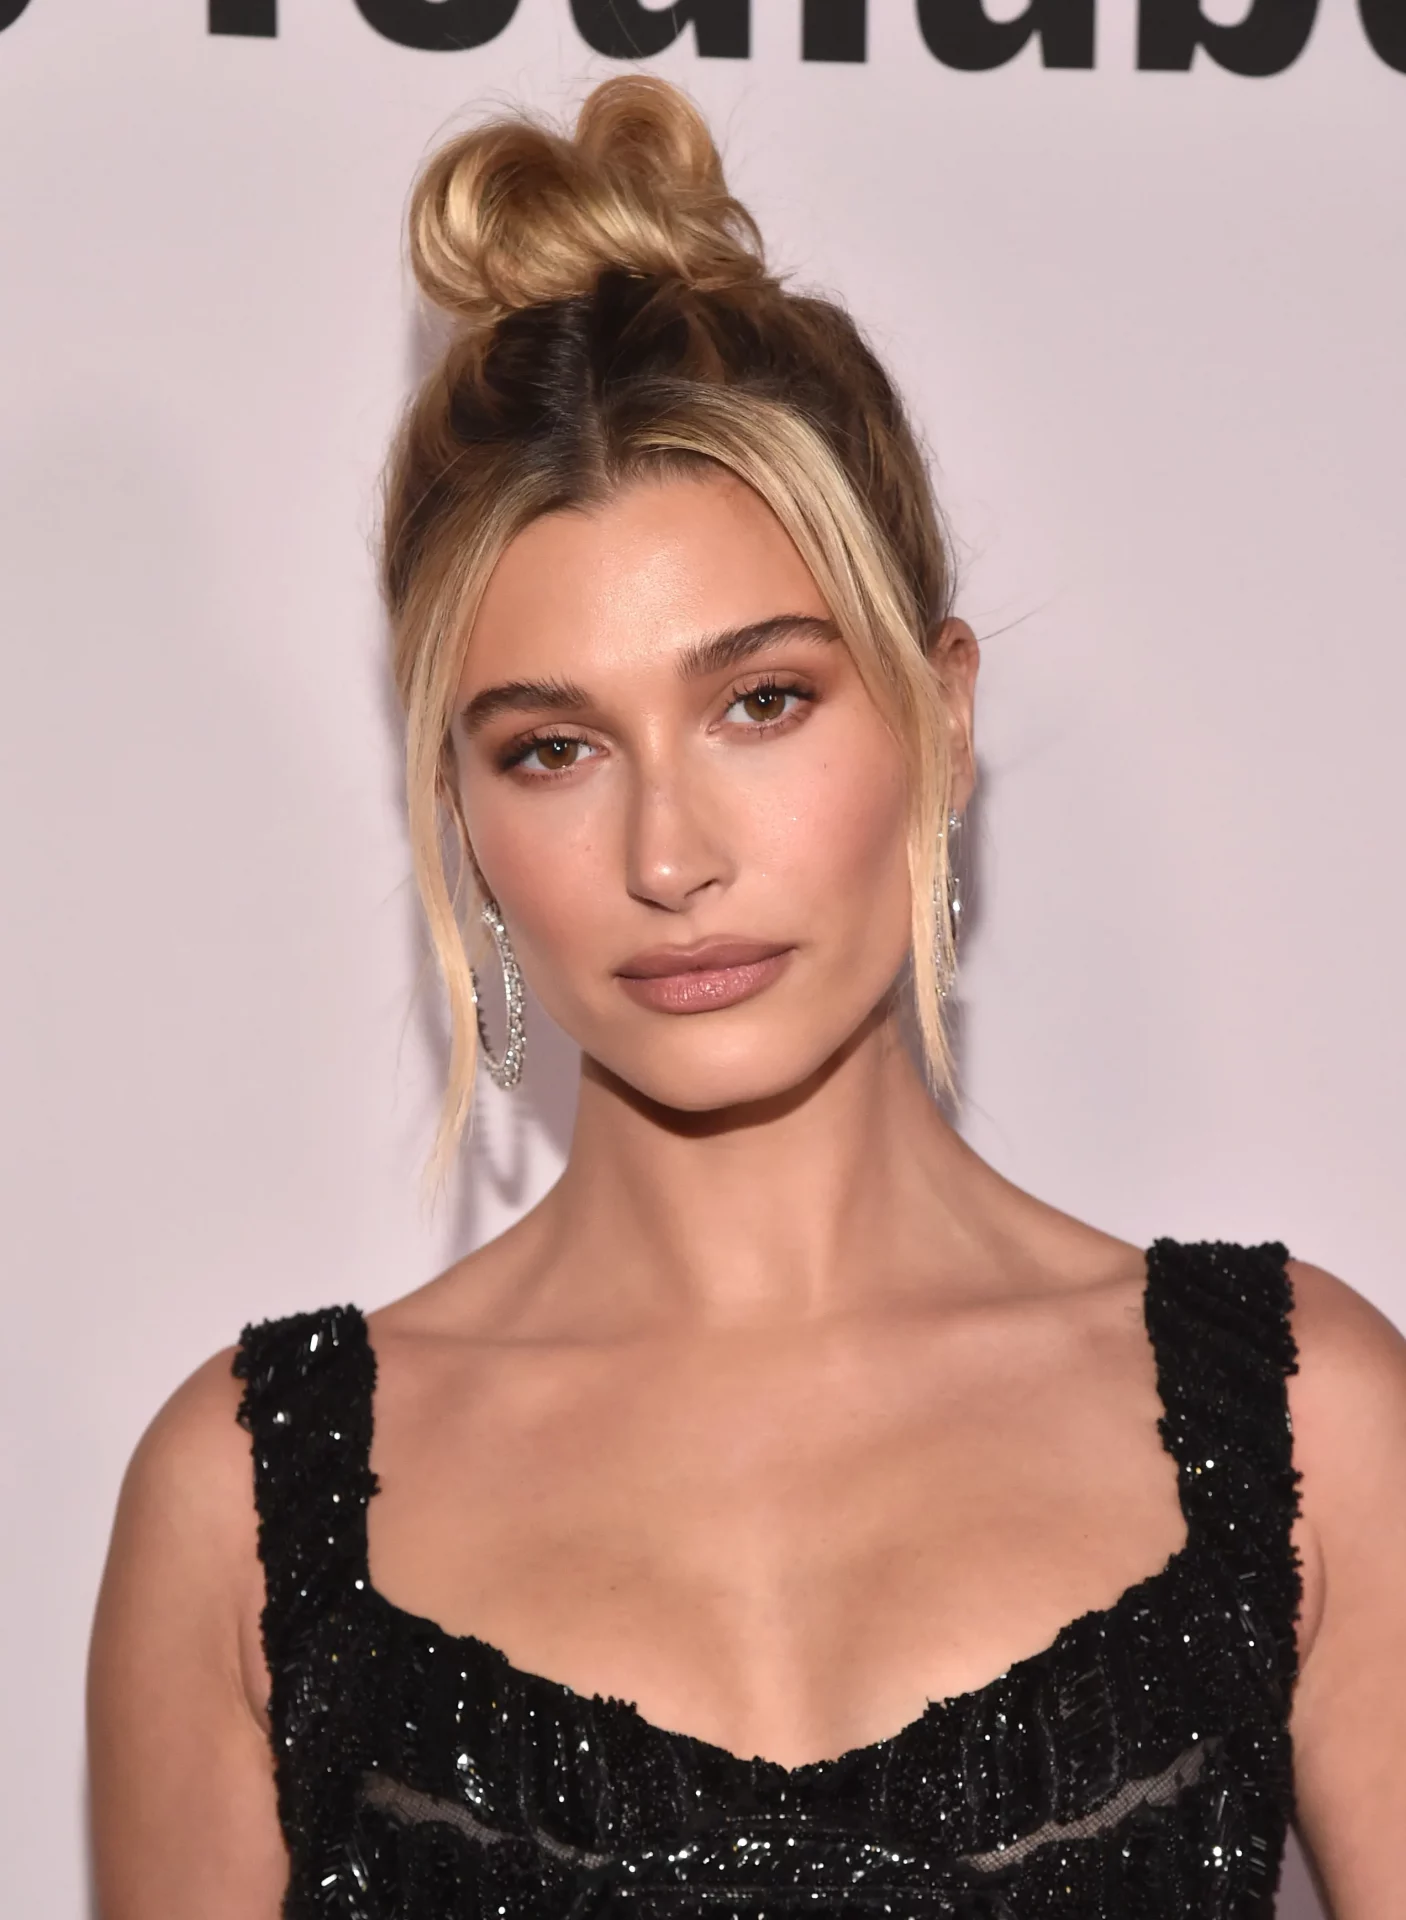 Hailey Bieber Style File: Every sexy street look from Hailey Bieber